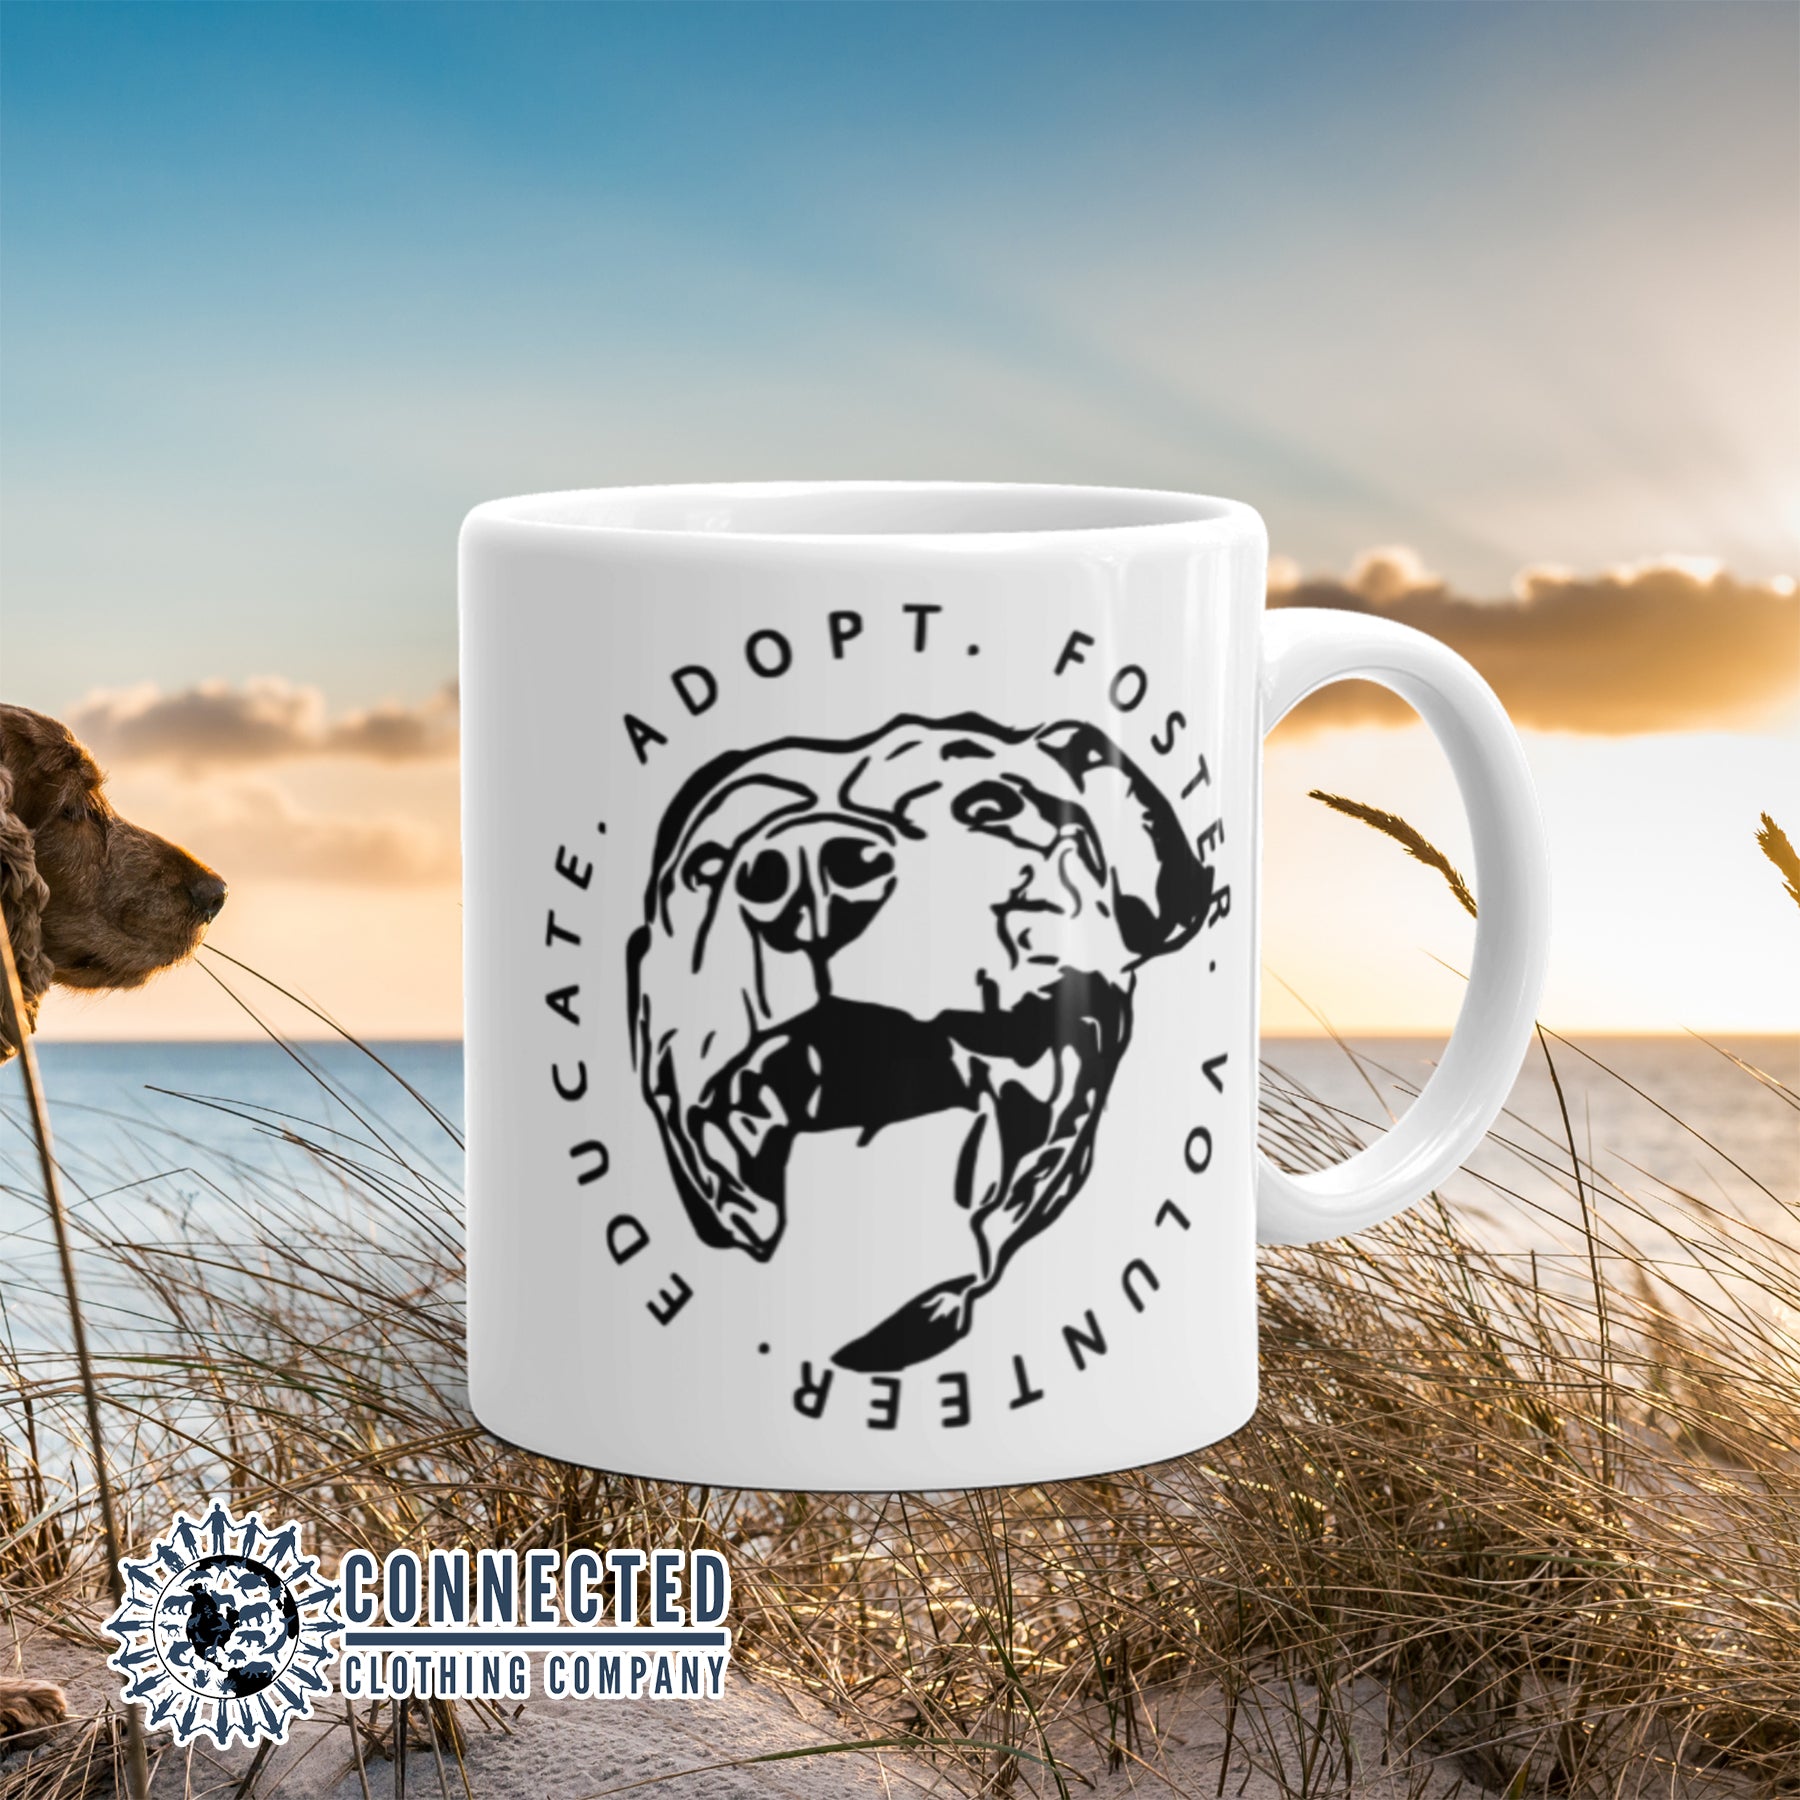 Adopt Educate Foster Volunteer Classic Mug - architectconstructor - Ethically and Sustainably Made - 10% of profits donated to animal rescue organizations